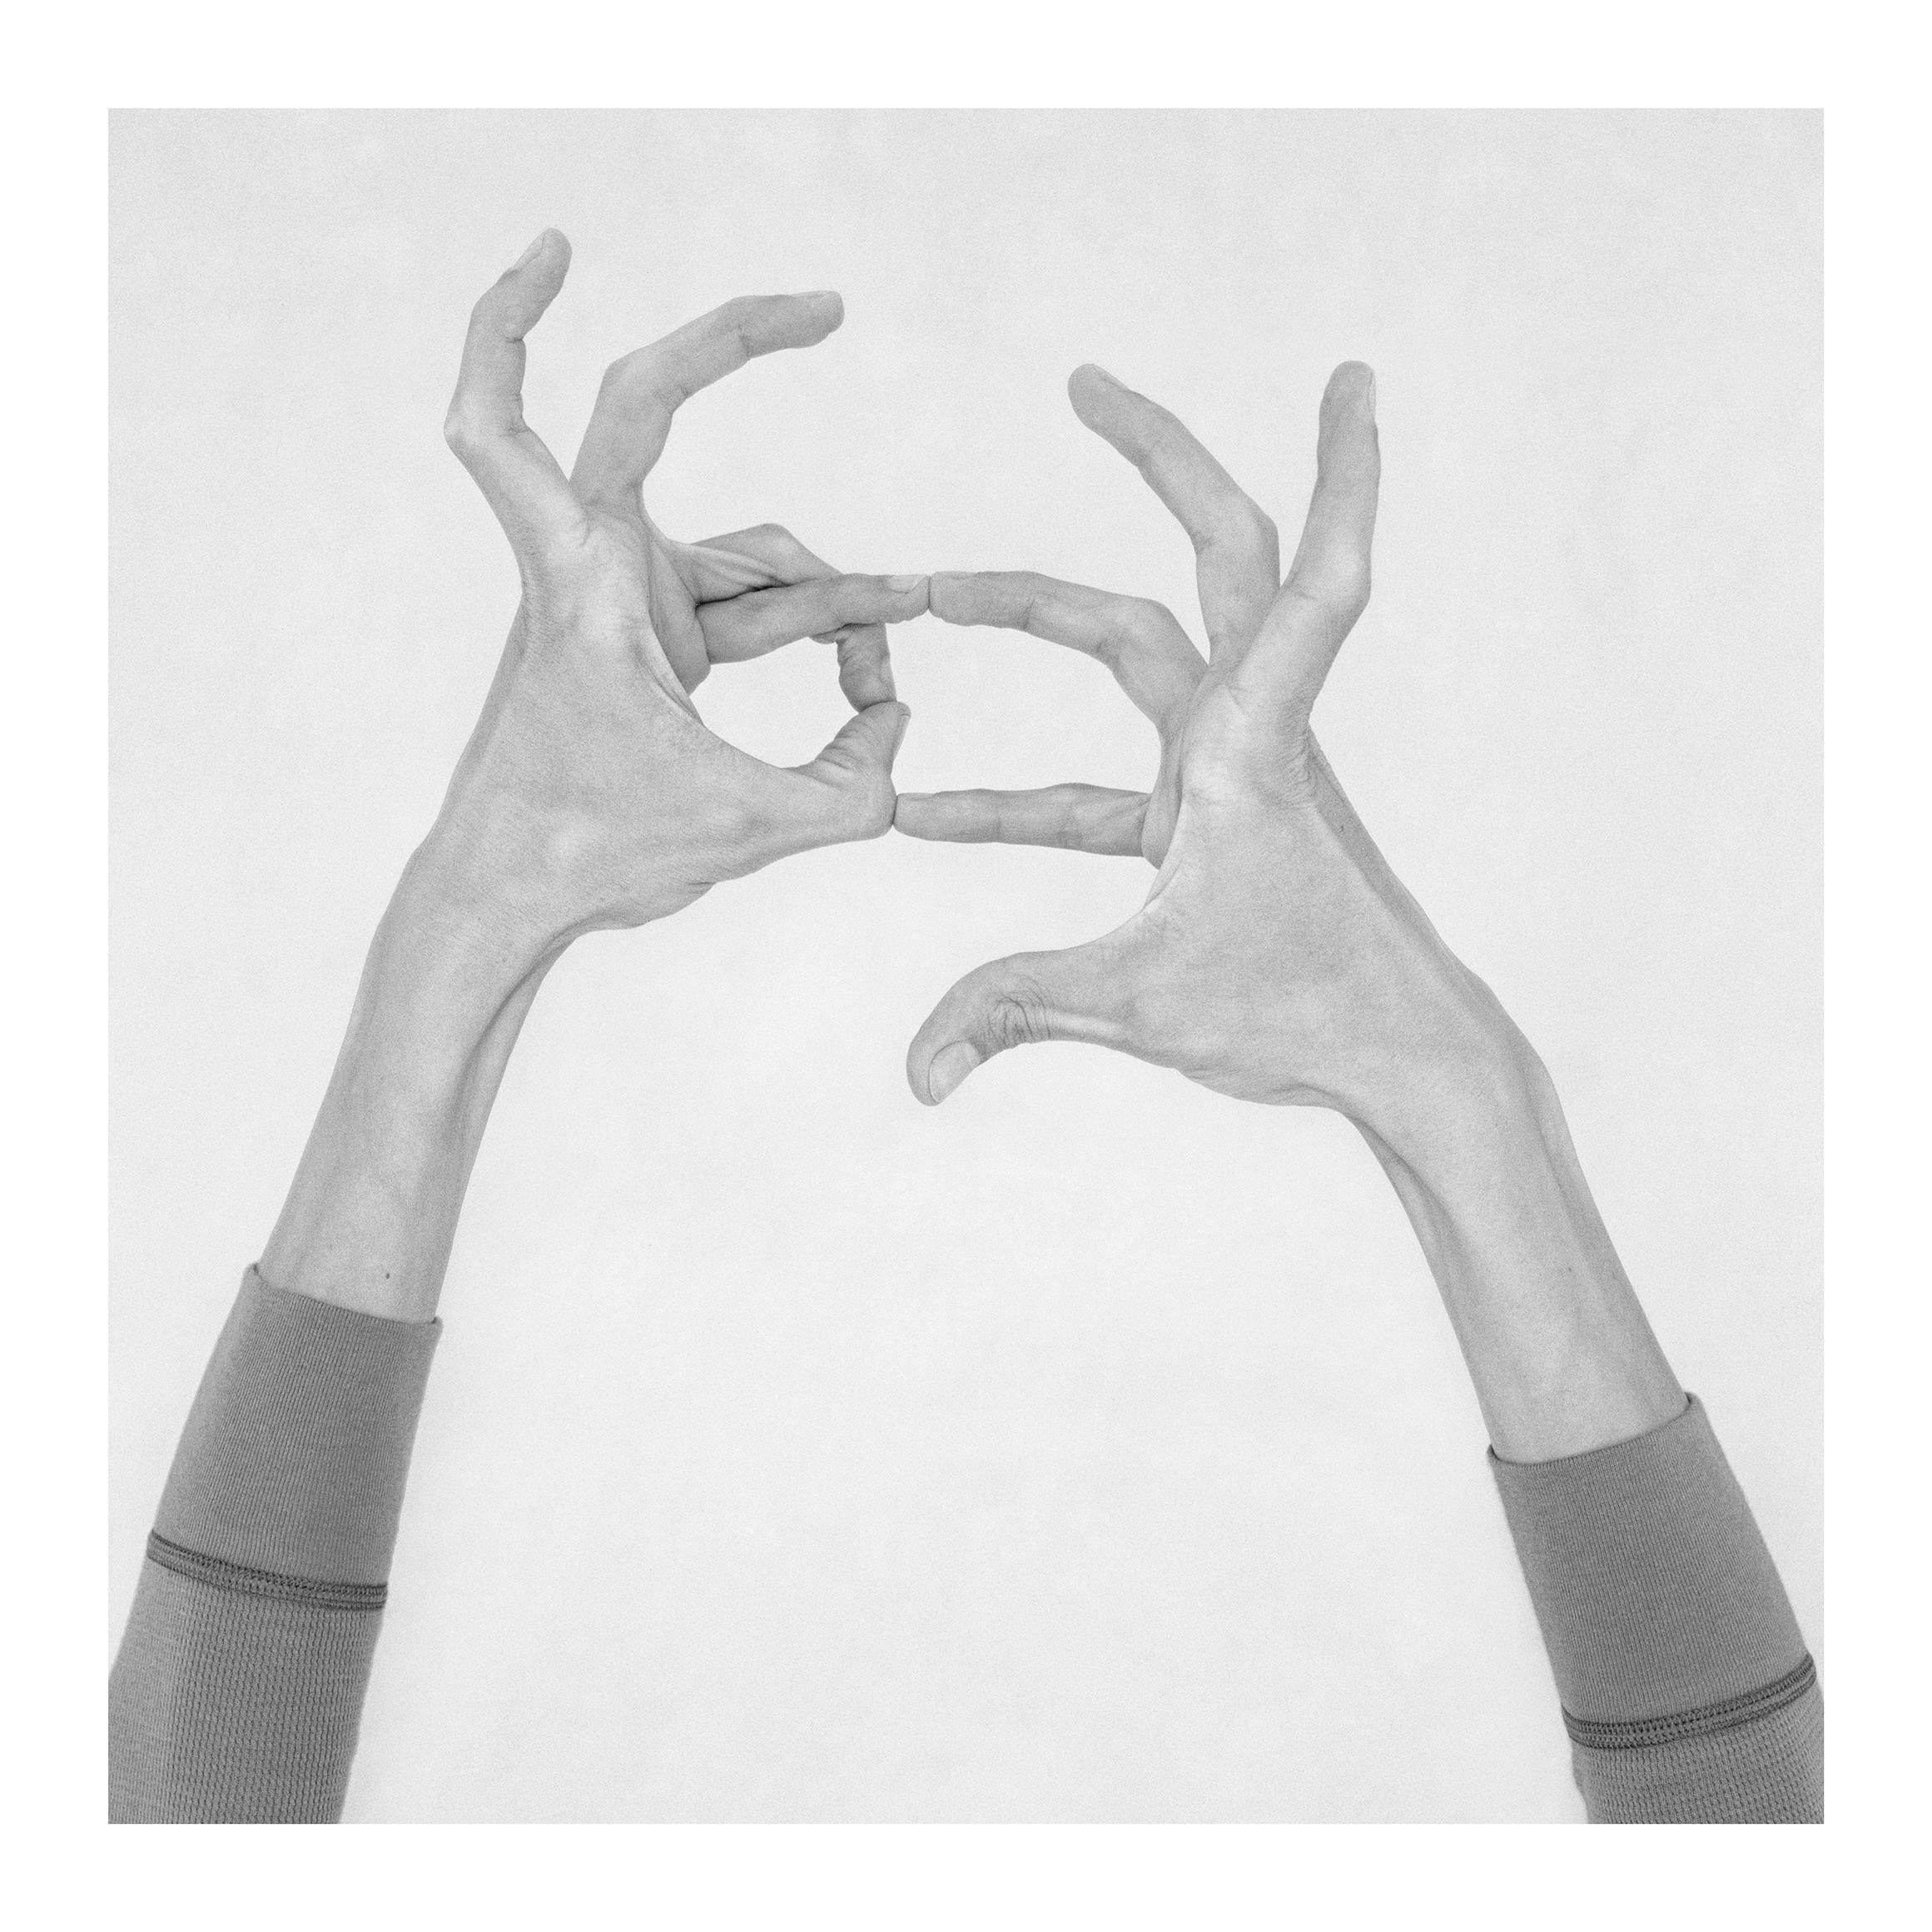 Untitled I, Untitled II, and Untitled XI, Hands. From the Series Chiromorphose - Photograph by Nico Baixas / Gos-com-fuig